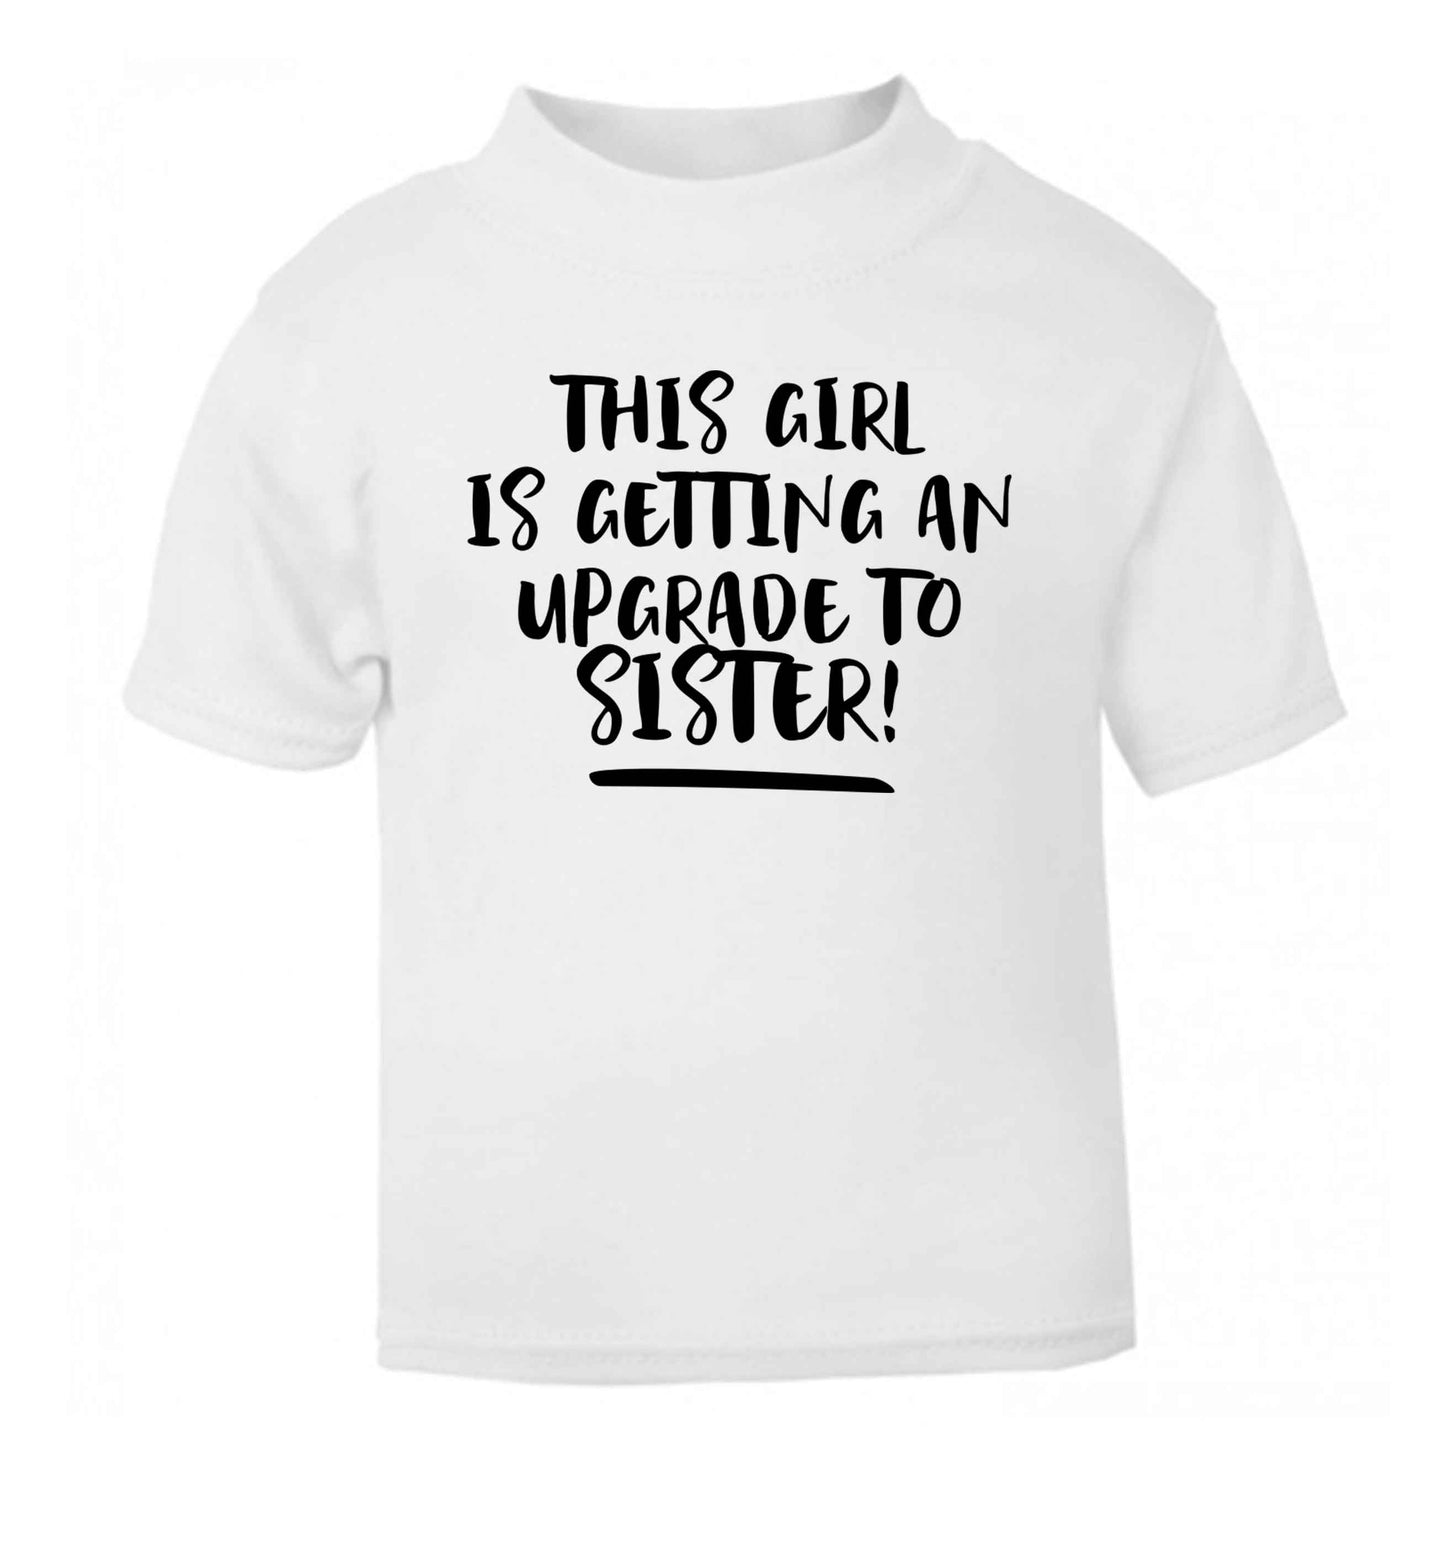 This girl is getting an upgrade to sister! white Baby Toddler Tshirt 2 Years